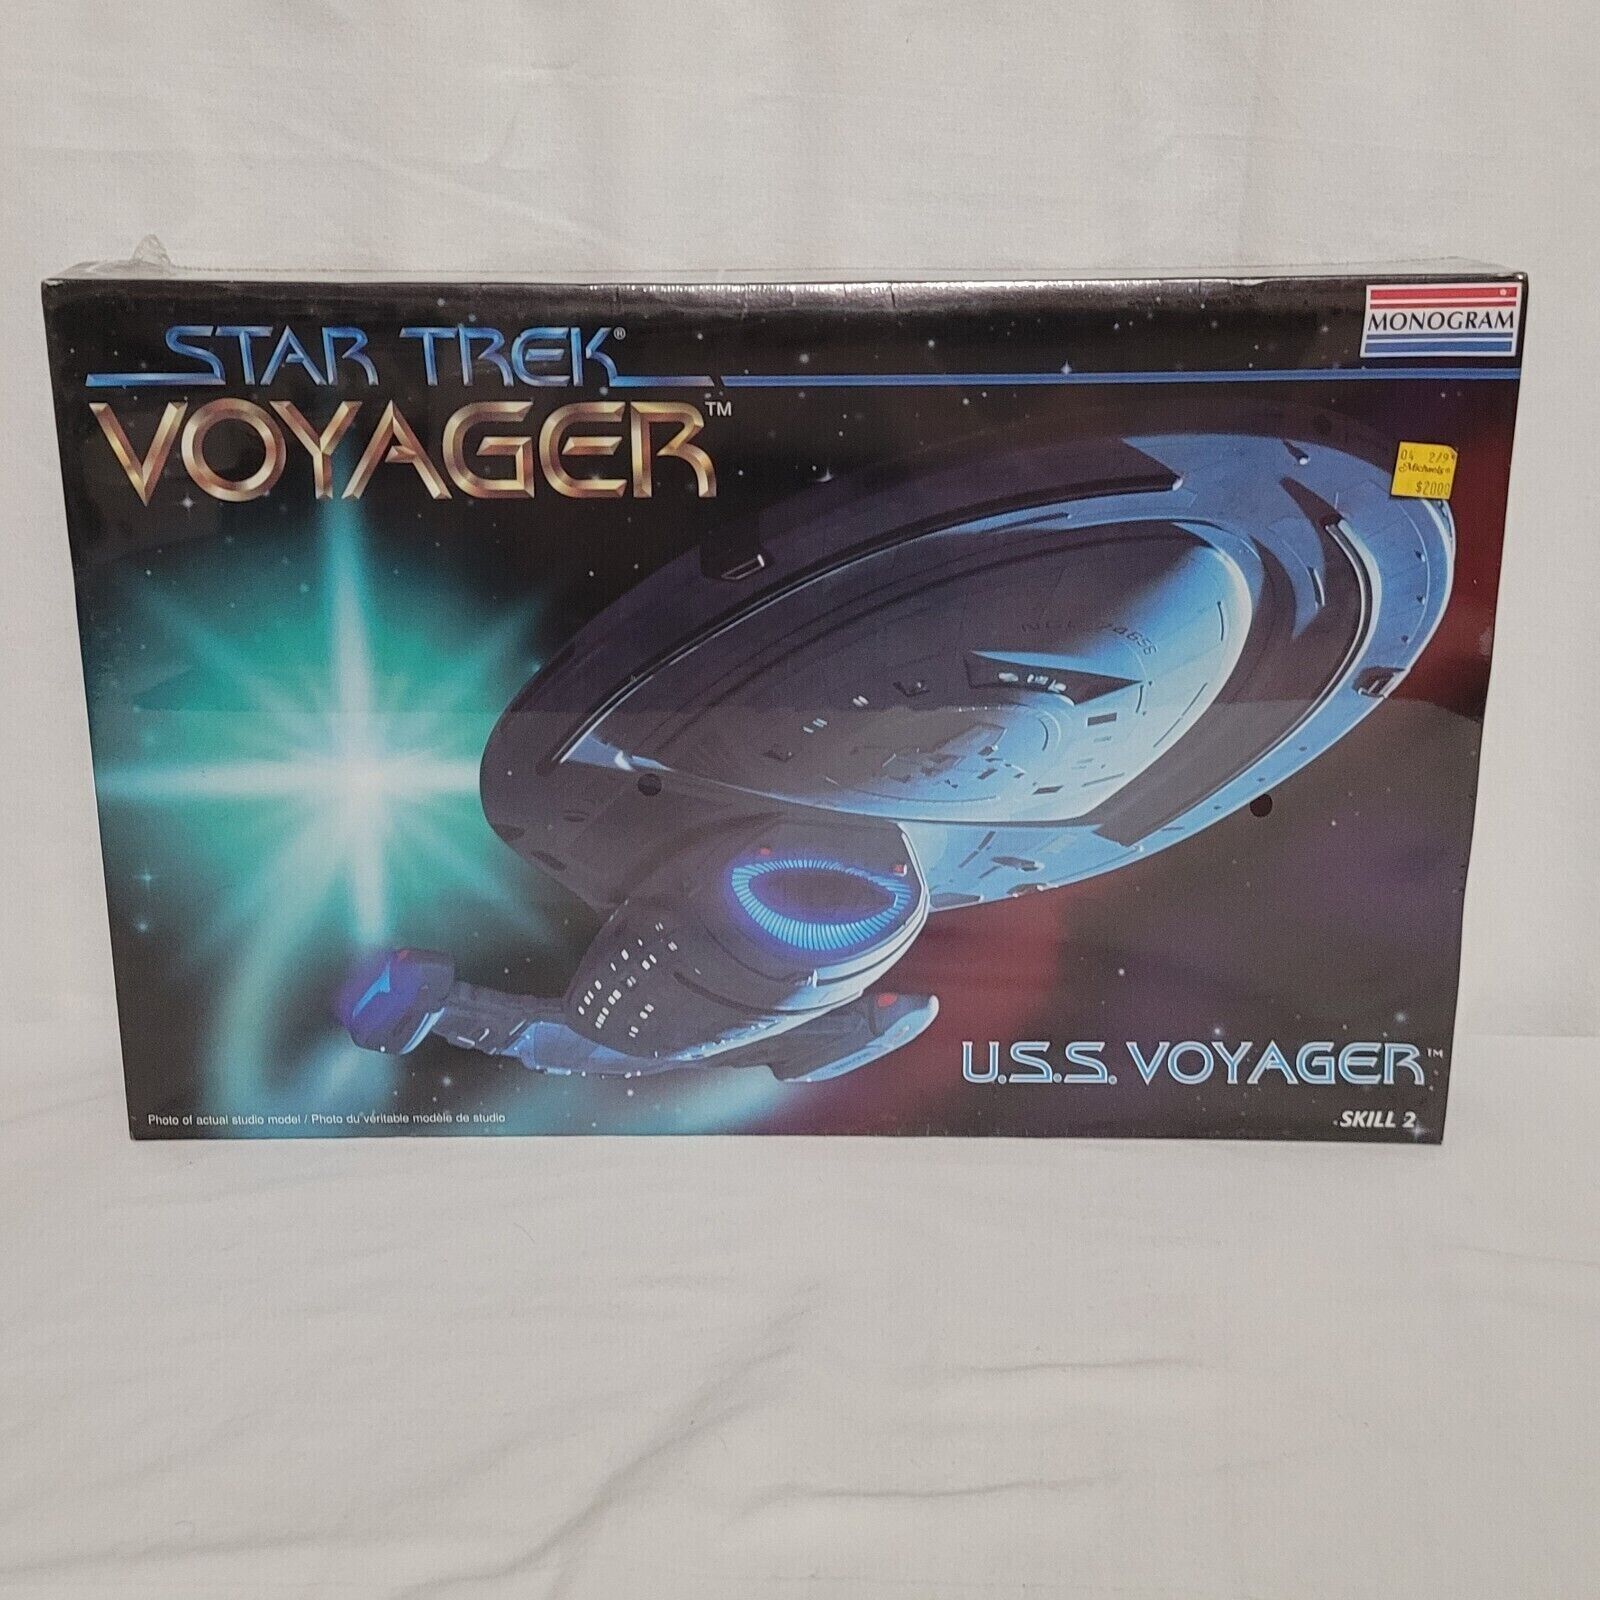 New Revell Monogram USS Voyager Space Ship Model Kit opened box parts sealed